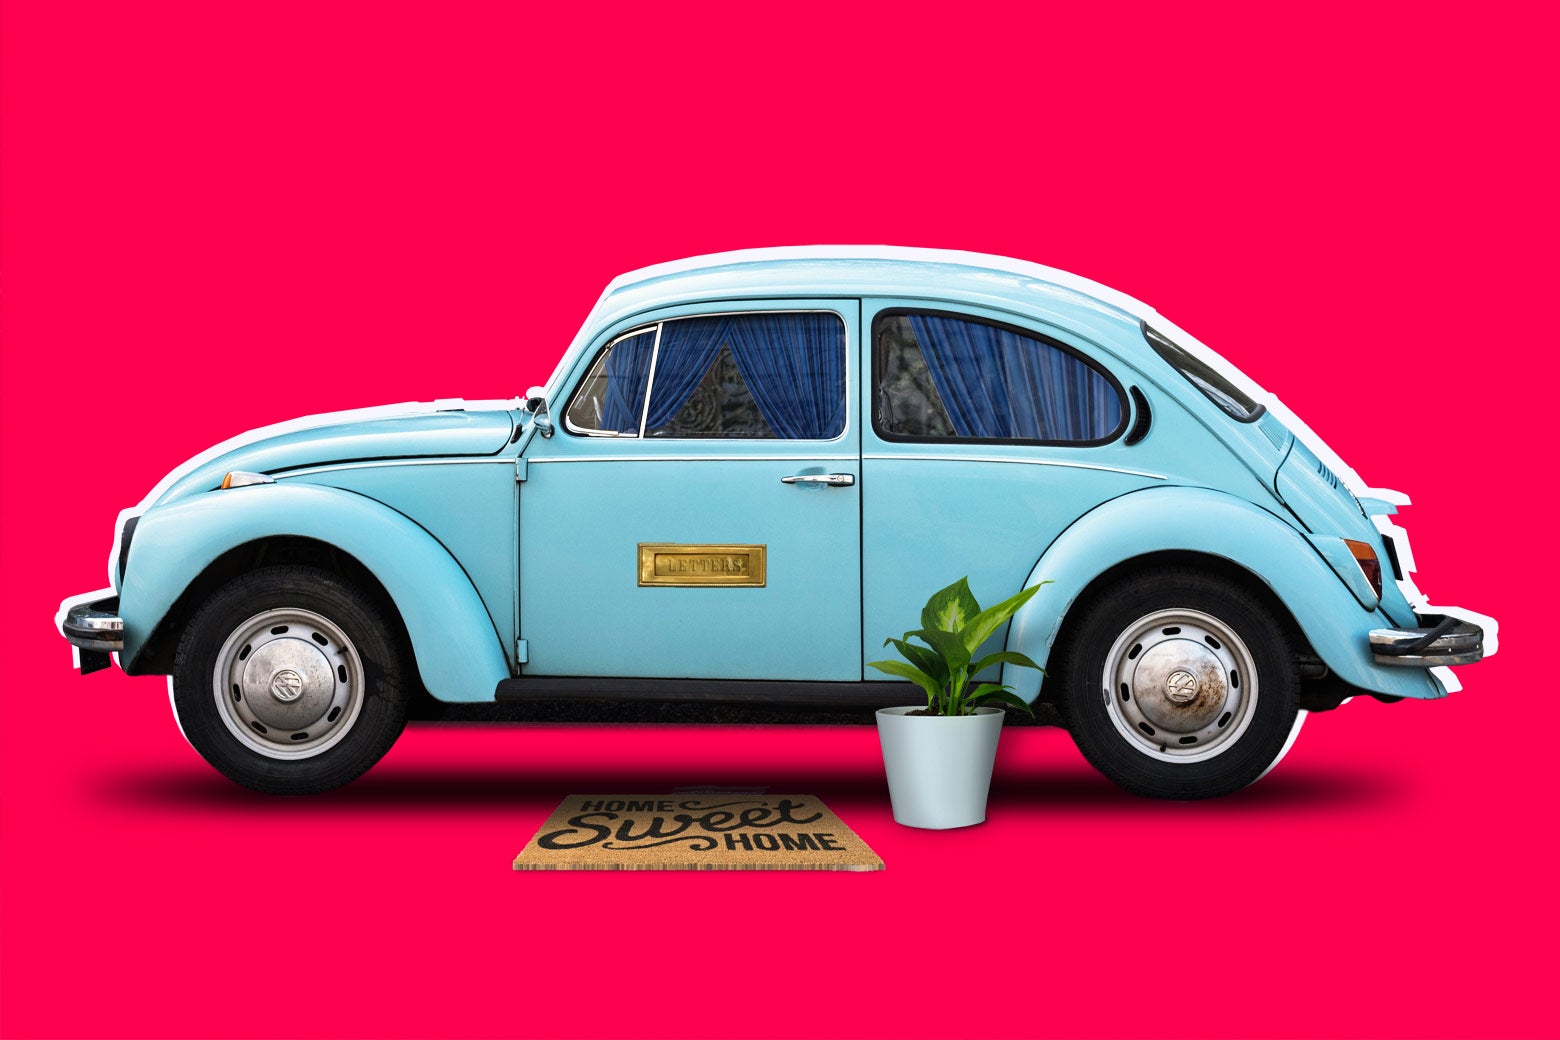 A sky-blue Volkswagen Beetle decked out like a cozy home, with curtains, a house plant, a mail slot, and a welcome mat.